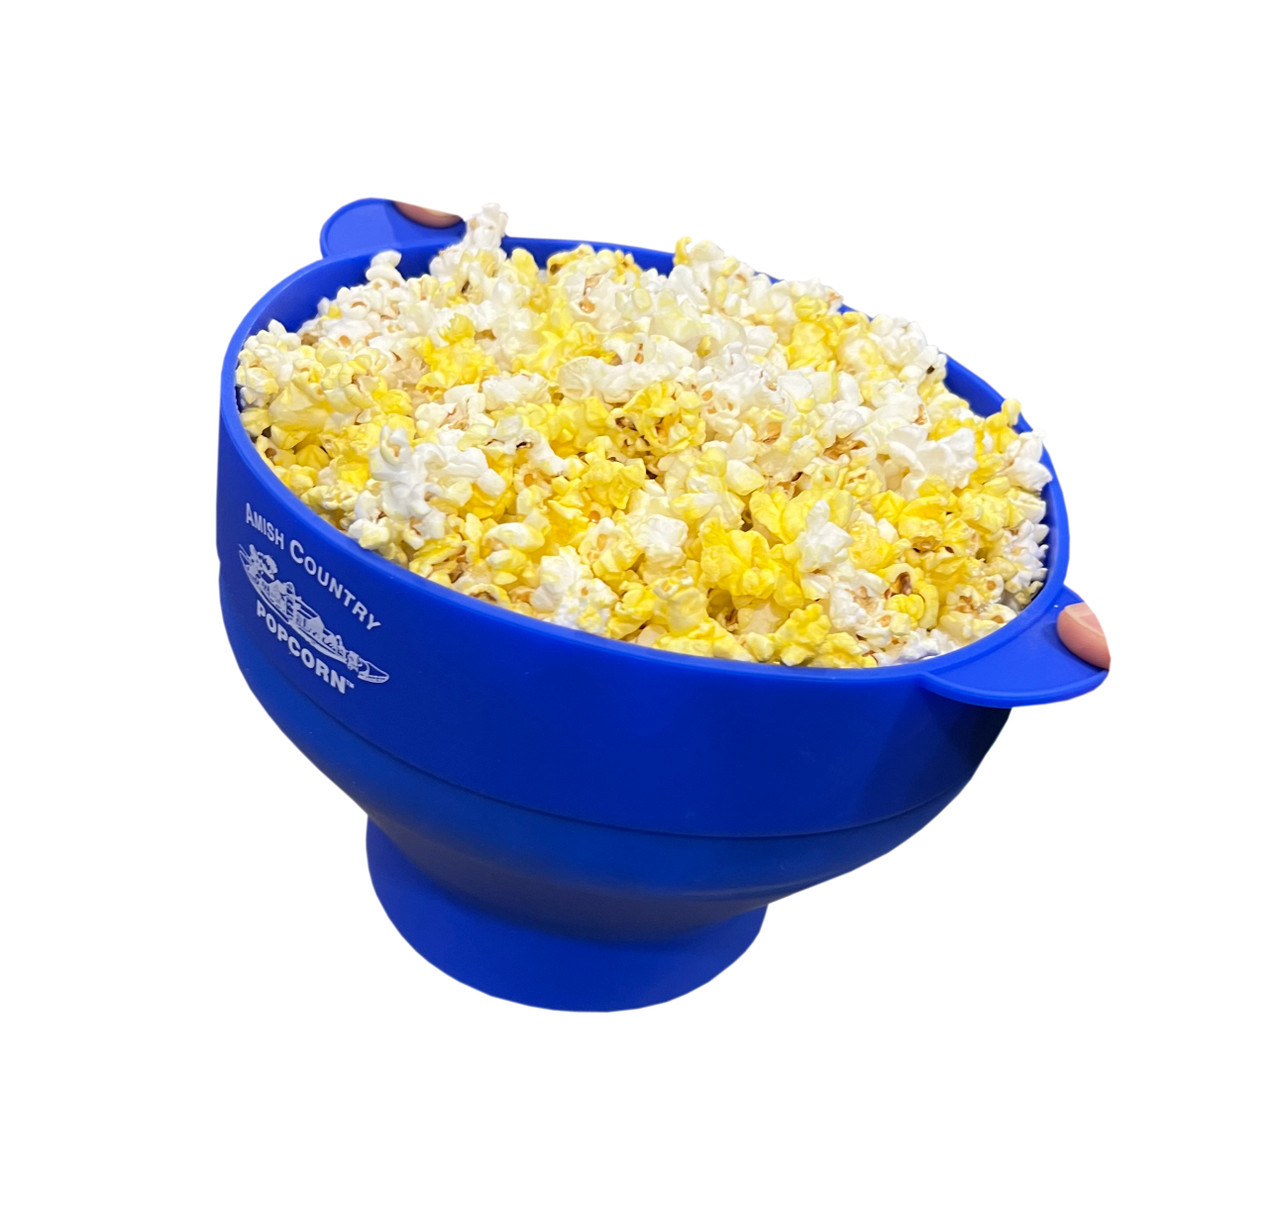 https://cdn11.bigcommerce.com/s-ejy7yev/images/stencil/1280x1280/products/570/1857/silicone-popcorn-popper-blue__66656.1695756851.jpg?c=2